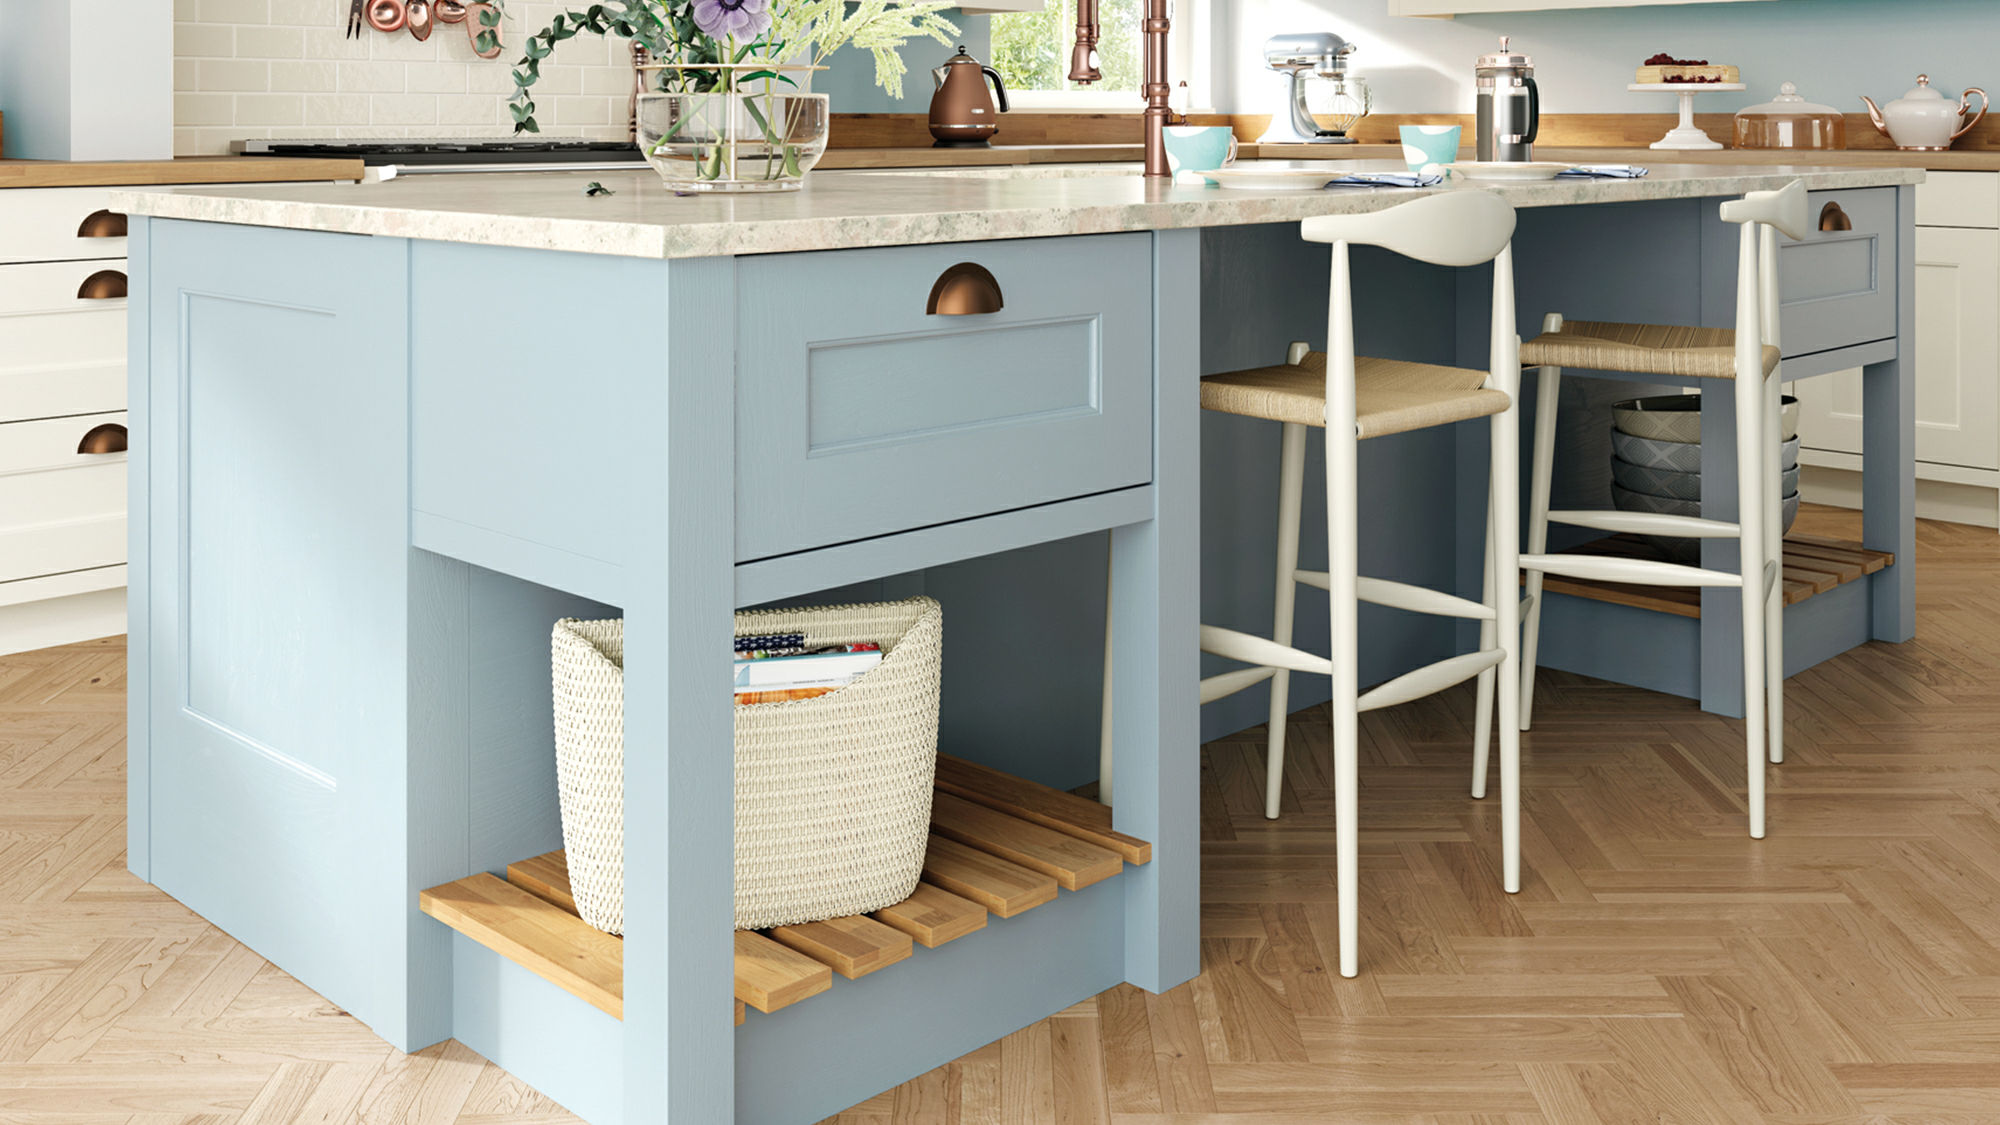 Wakefield solid wood Pantry Blue kitchens showcasing artisanal quality in a lovely shade of pantry blue